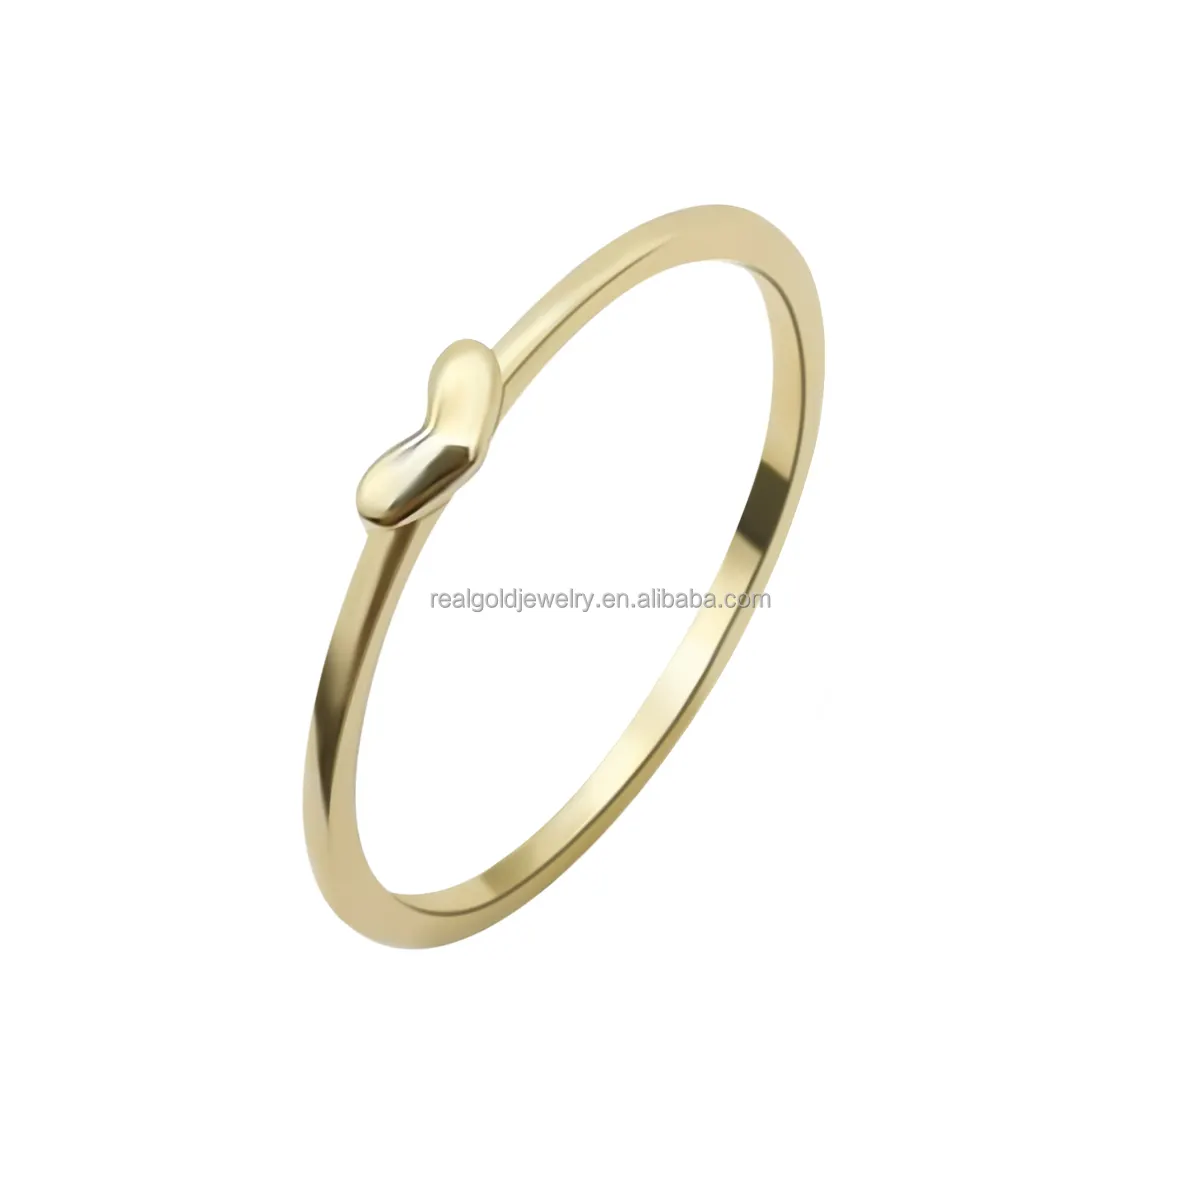 Lovely Romantic Real Gold Heart Rings Simplest Solid 14K Gold Heart Ring Dainty Finger Ring Jewelry